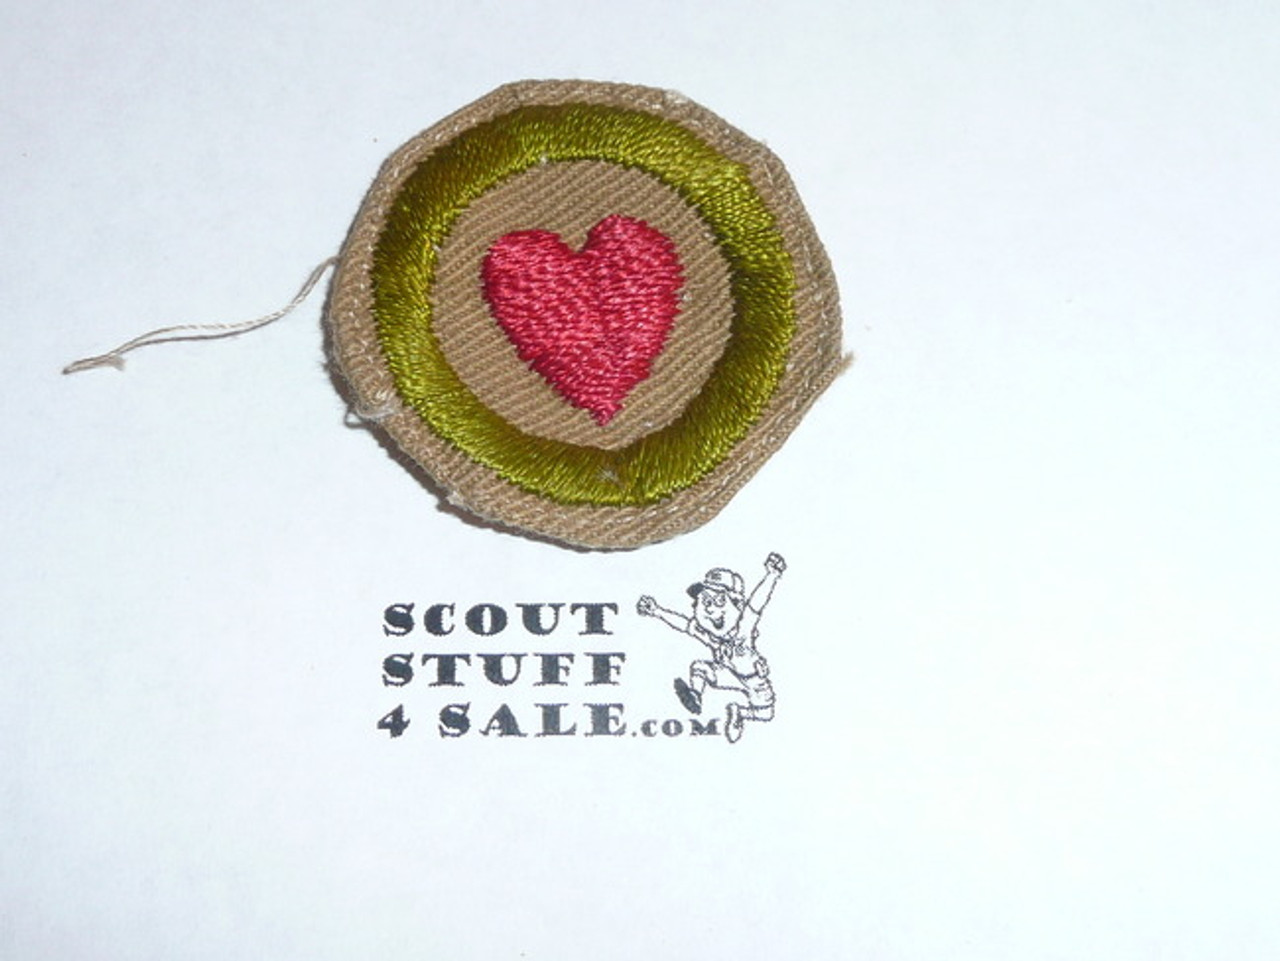 Personal Health - Type A - Square Tan Merit Badge (1911-1933), Material folded under with some trimming